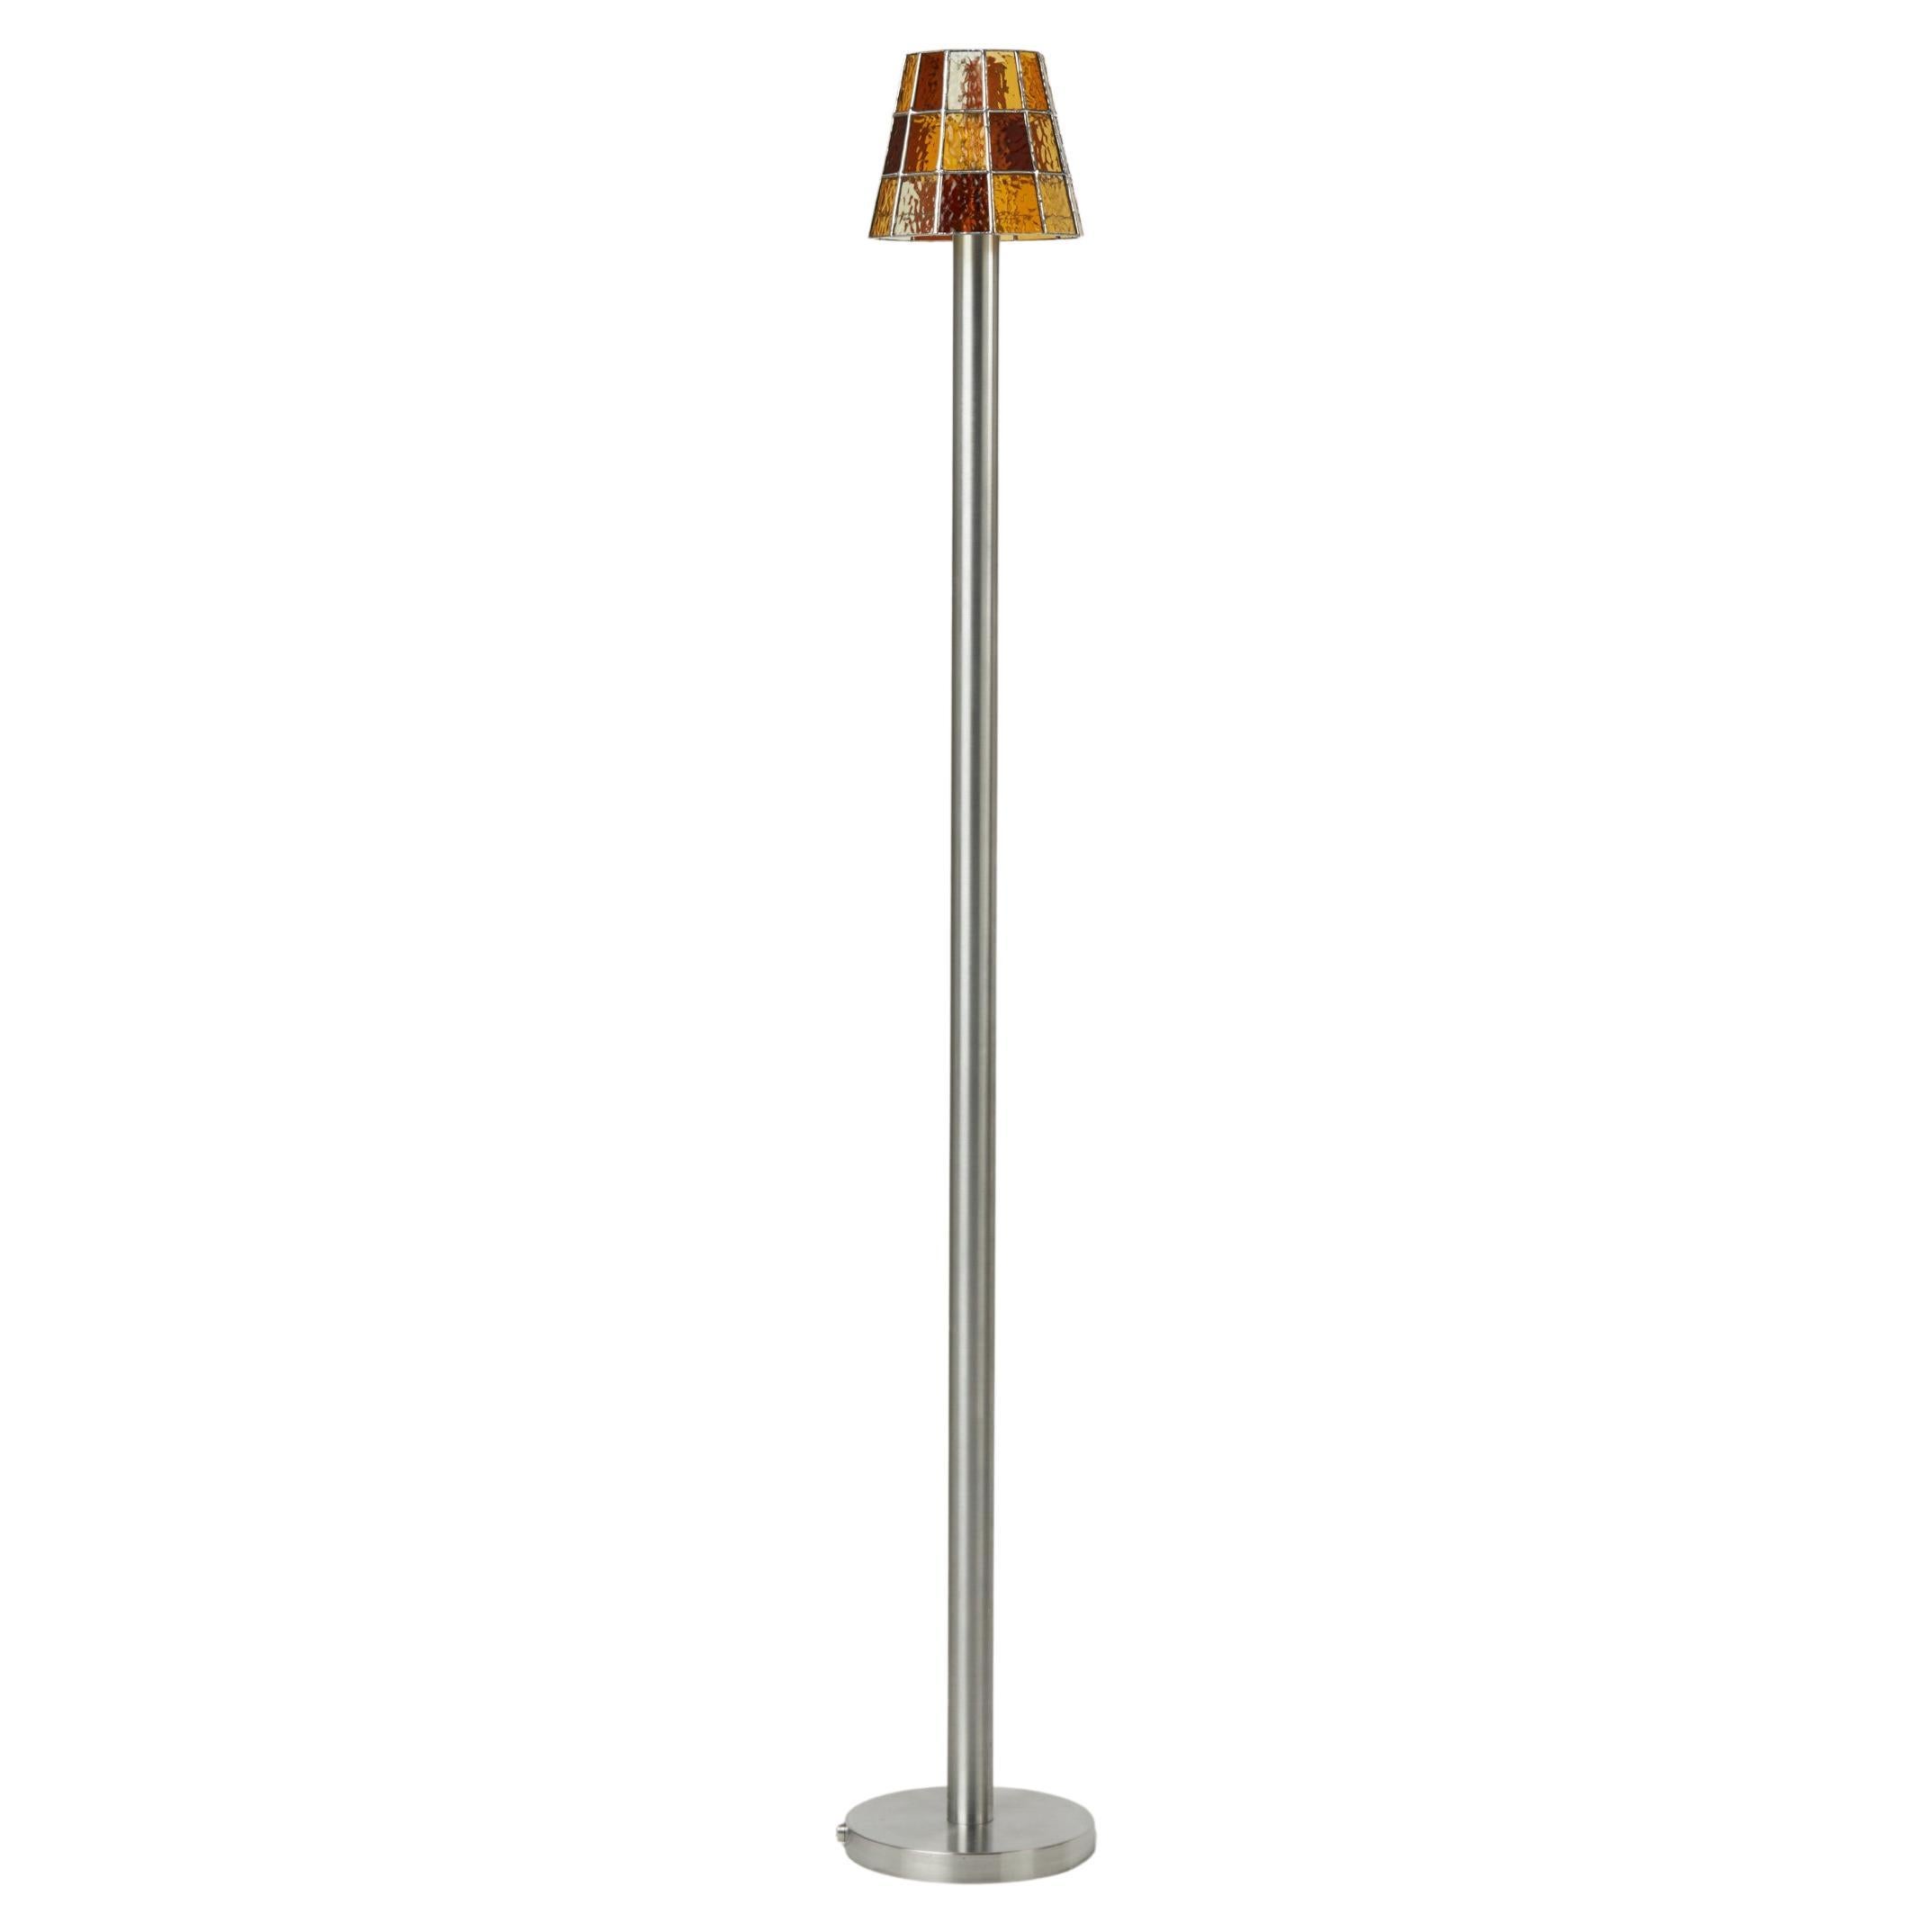 Fun Guy Stained Glass Floor Lamp by Frangere Studio